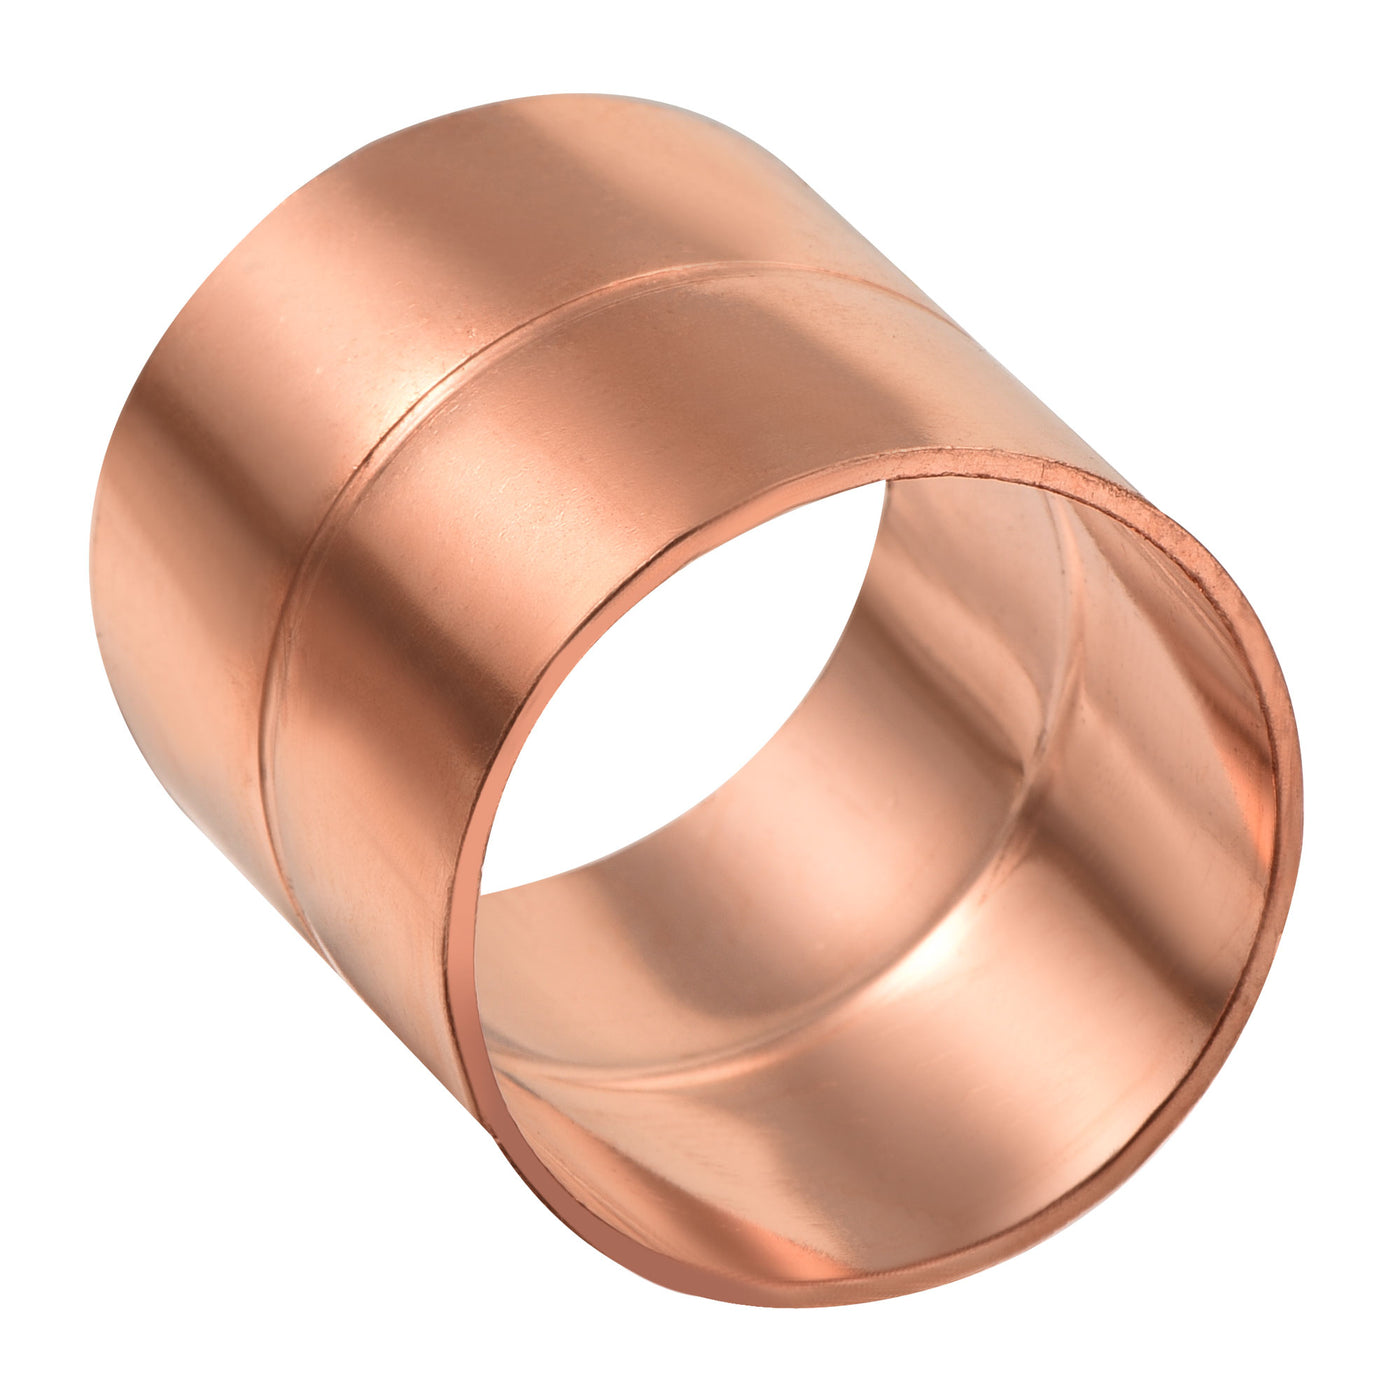 Harfington Straight Copper Coupling Fittings, 1.26 Inch ID Welding Joint for HVAC Air Conditioner